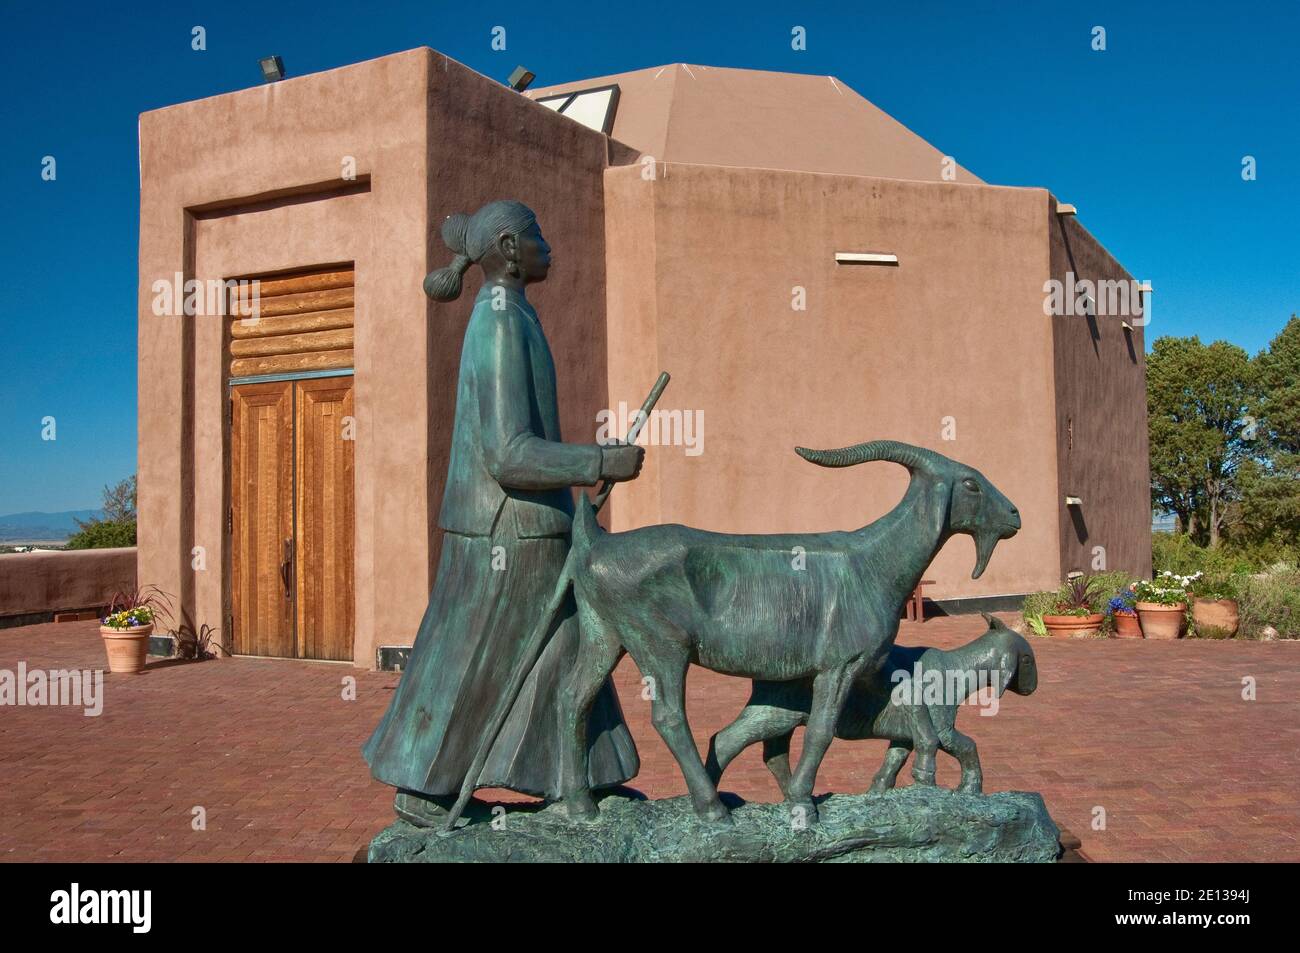 Heading Home, bronze sculpture by Allan Houser, Chiricahua Apache Native American, Wheelwright Museum of the American Indian, Santa Fe, New Mexico USA Stock Photo